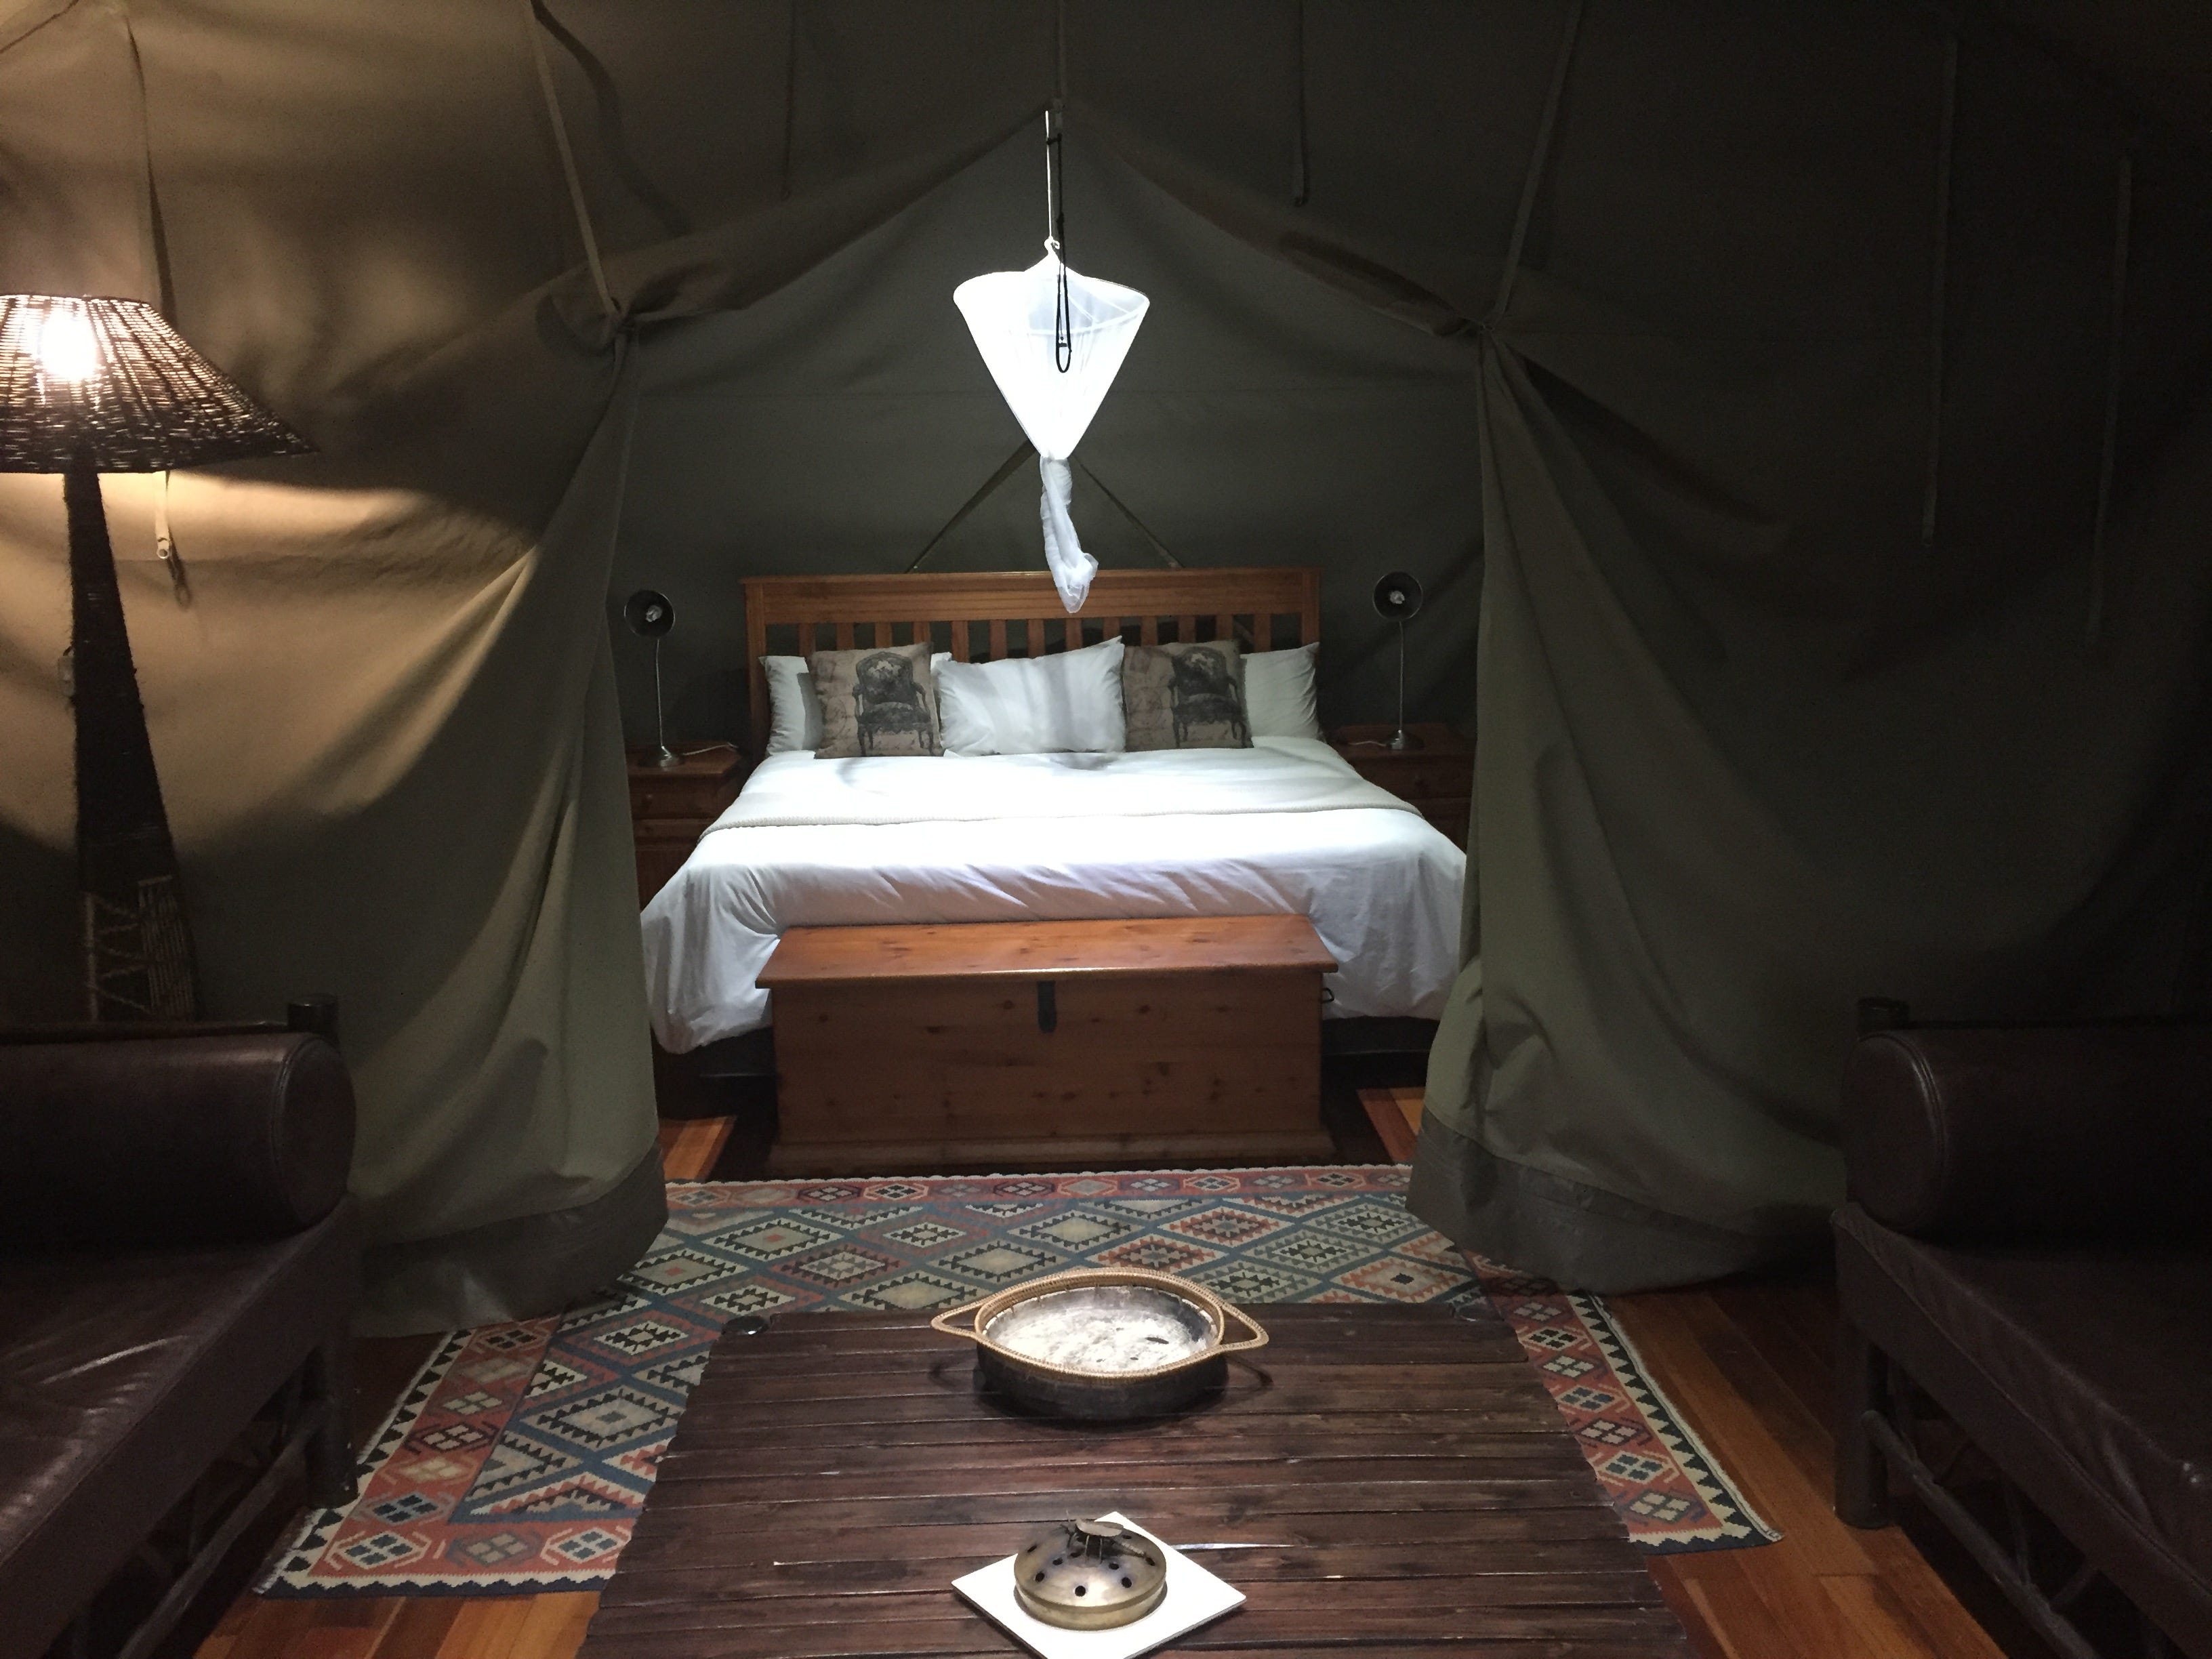 <p>I had booked a two-bedroom unit (two tents), but my friend couldn't come at the last minute. Since I couldn't change the reservation, I still stayed in the two-bedroom unit and my friend paid her share.</p><p>The campsite came with a small pool to dip in, but it was covered as the weather was pretty cold.</p><p>Each unit had a private bathroom and kitchen in a building separate from the tents, so I needed to leave my tent to use the bathroom at night.</p>